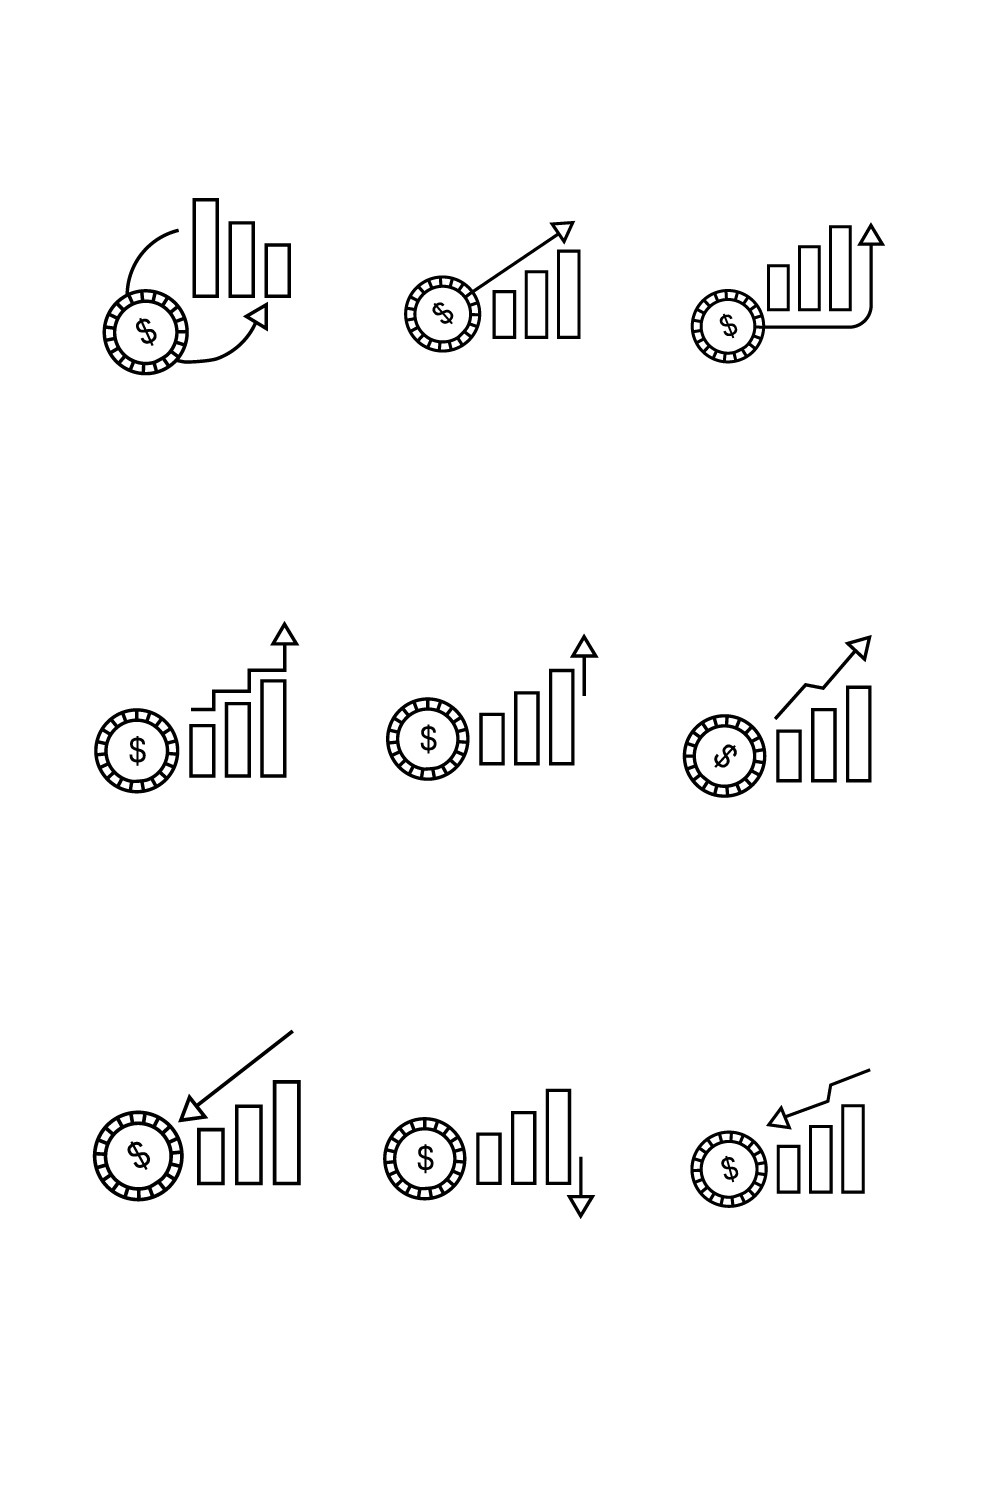 coin, bussines, arrow, flat illustration icon for your bussines app or web pinterest preview image.